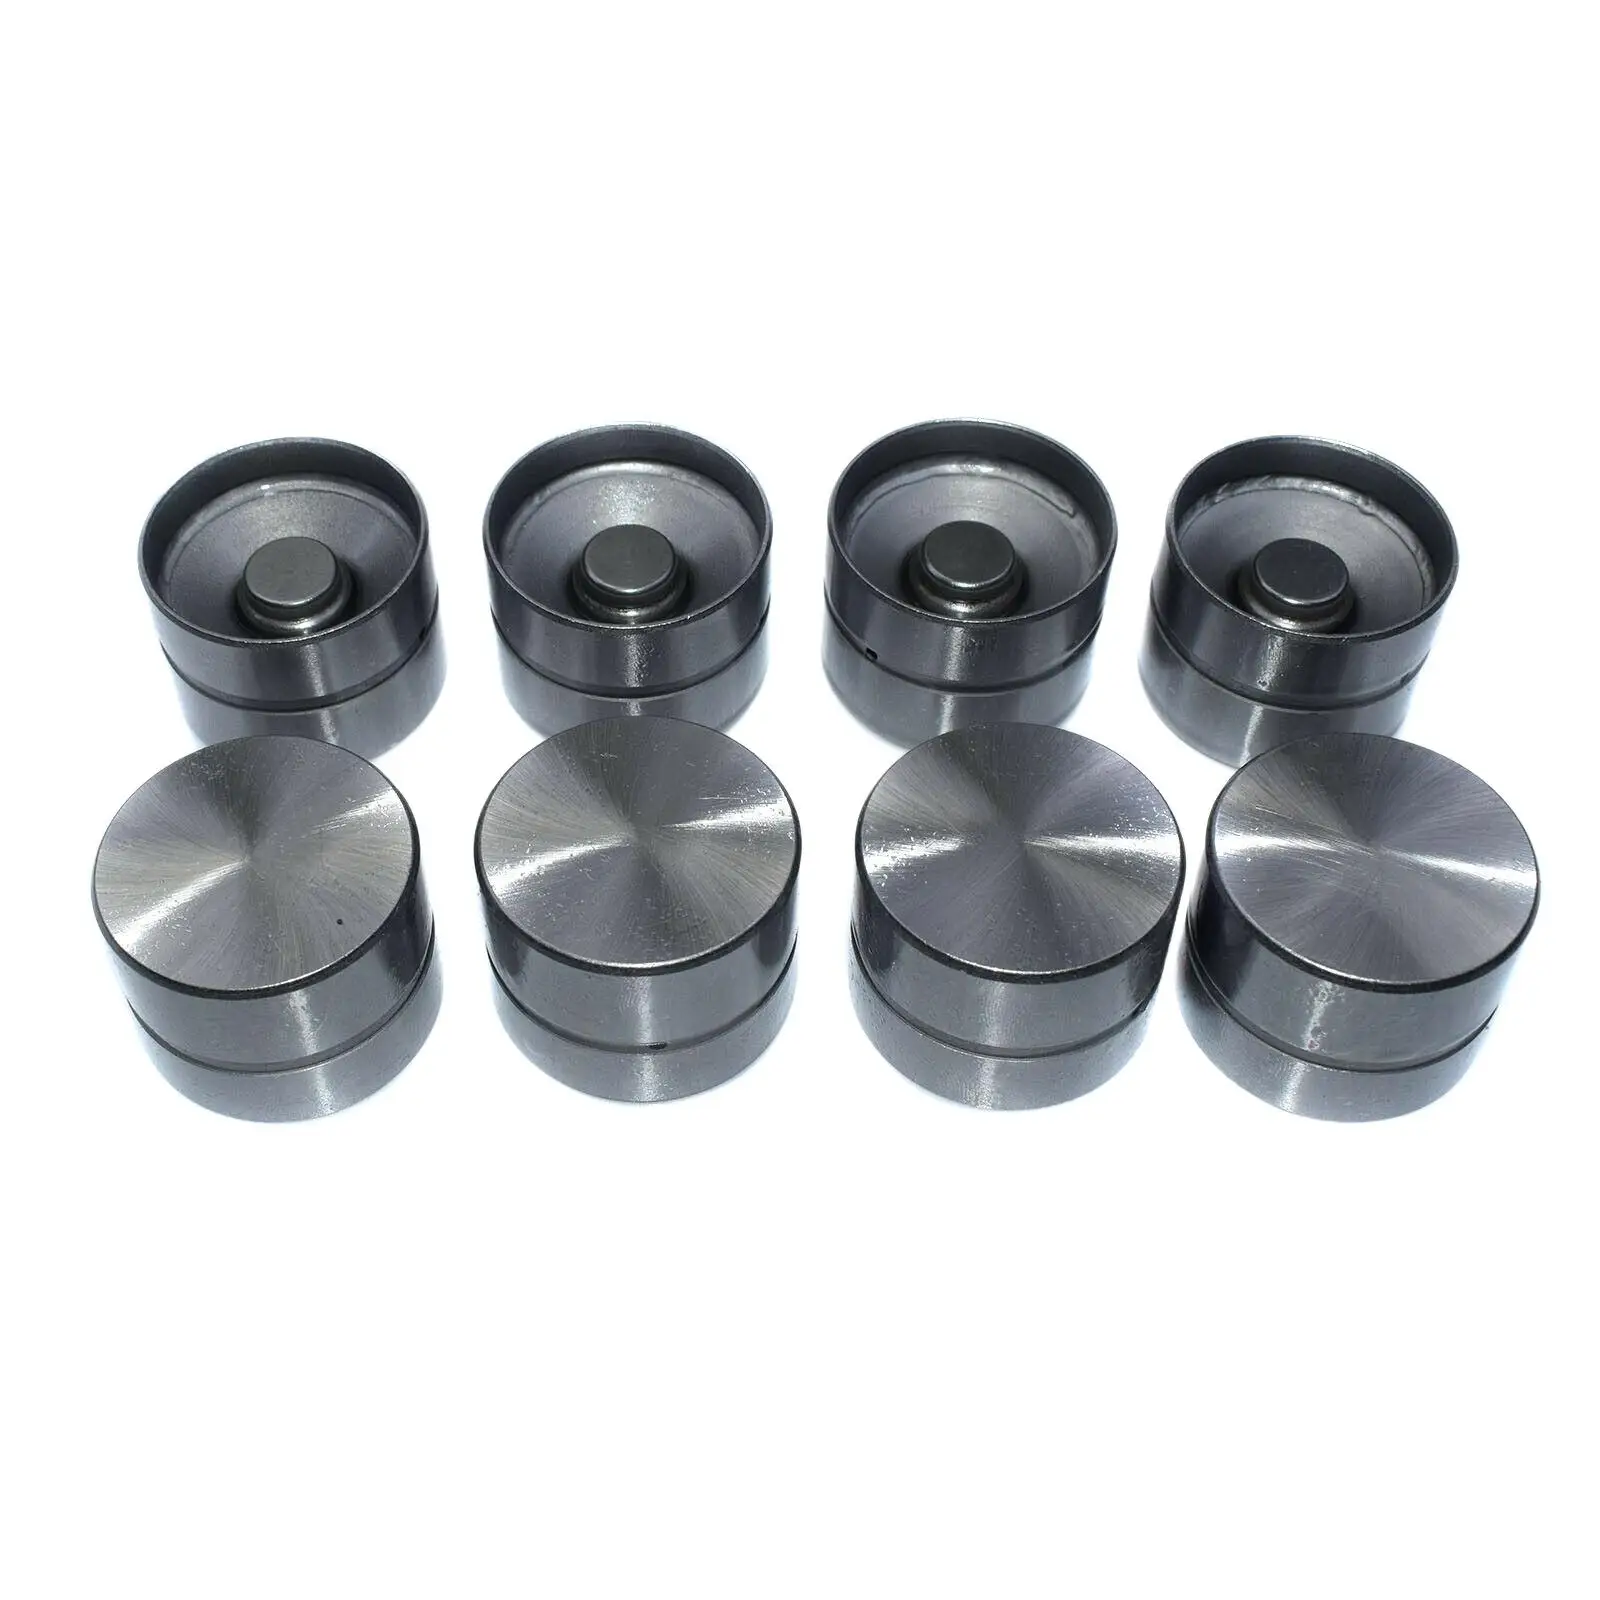  Engine Camshaft Hydraulic Lifter Tappets Follower Tappet Set Fit  A3  050109309M 050109309A 050109309H